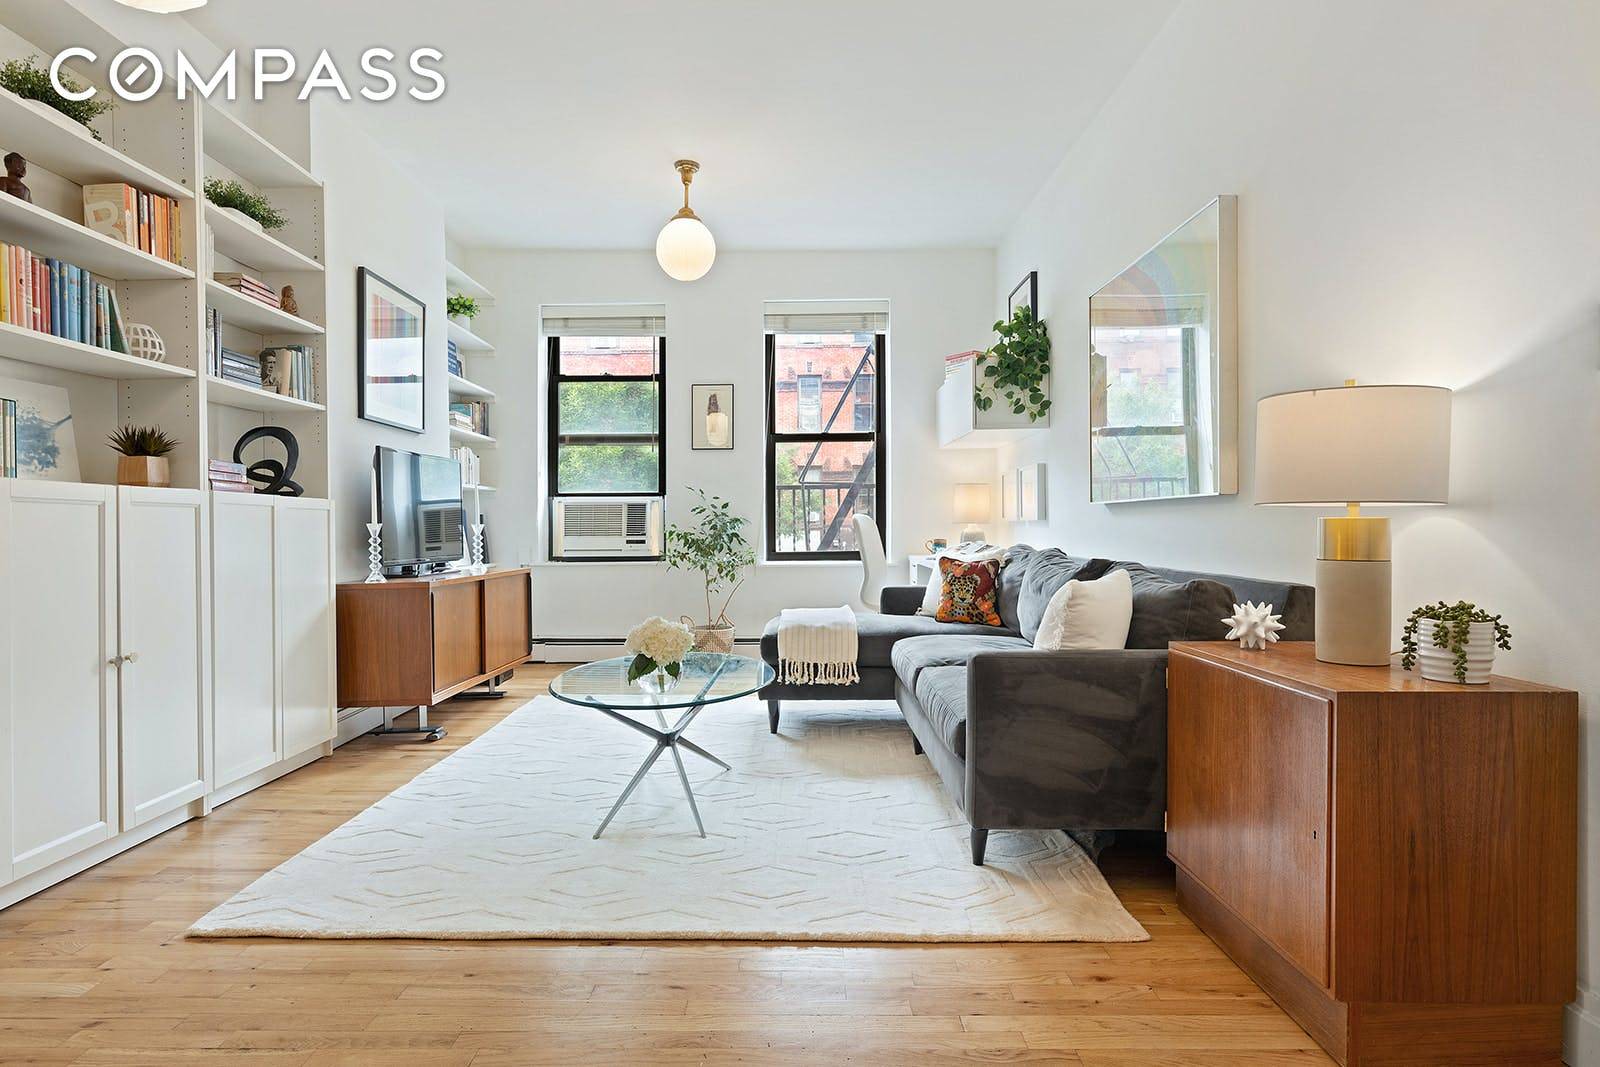 Welcome home to this stylish and smartly designed two bedroom, one bathroom residence only two short blocks from Prospect Park.